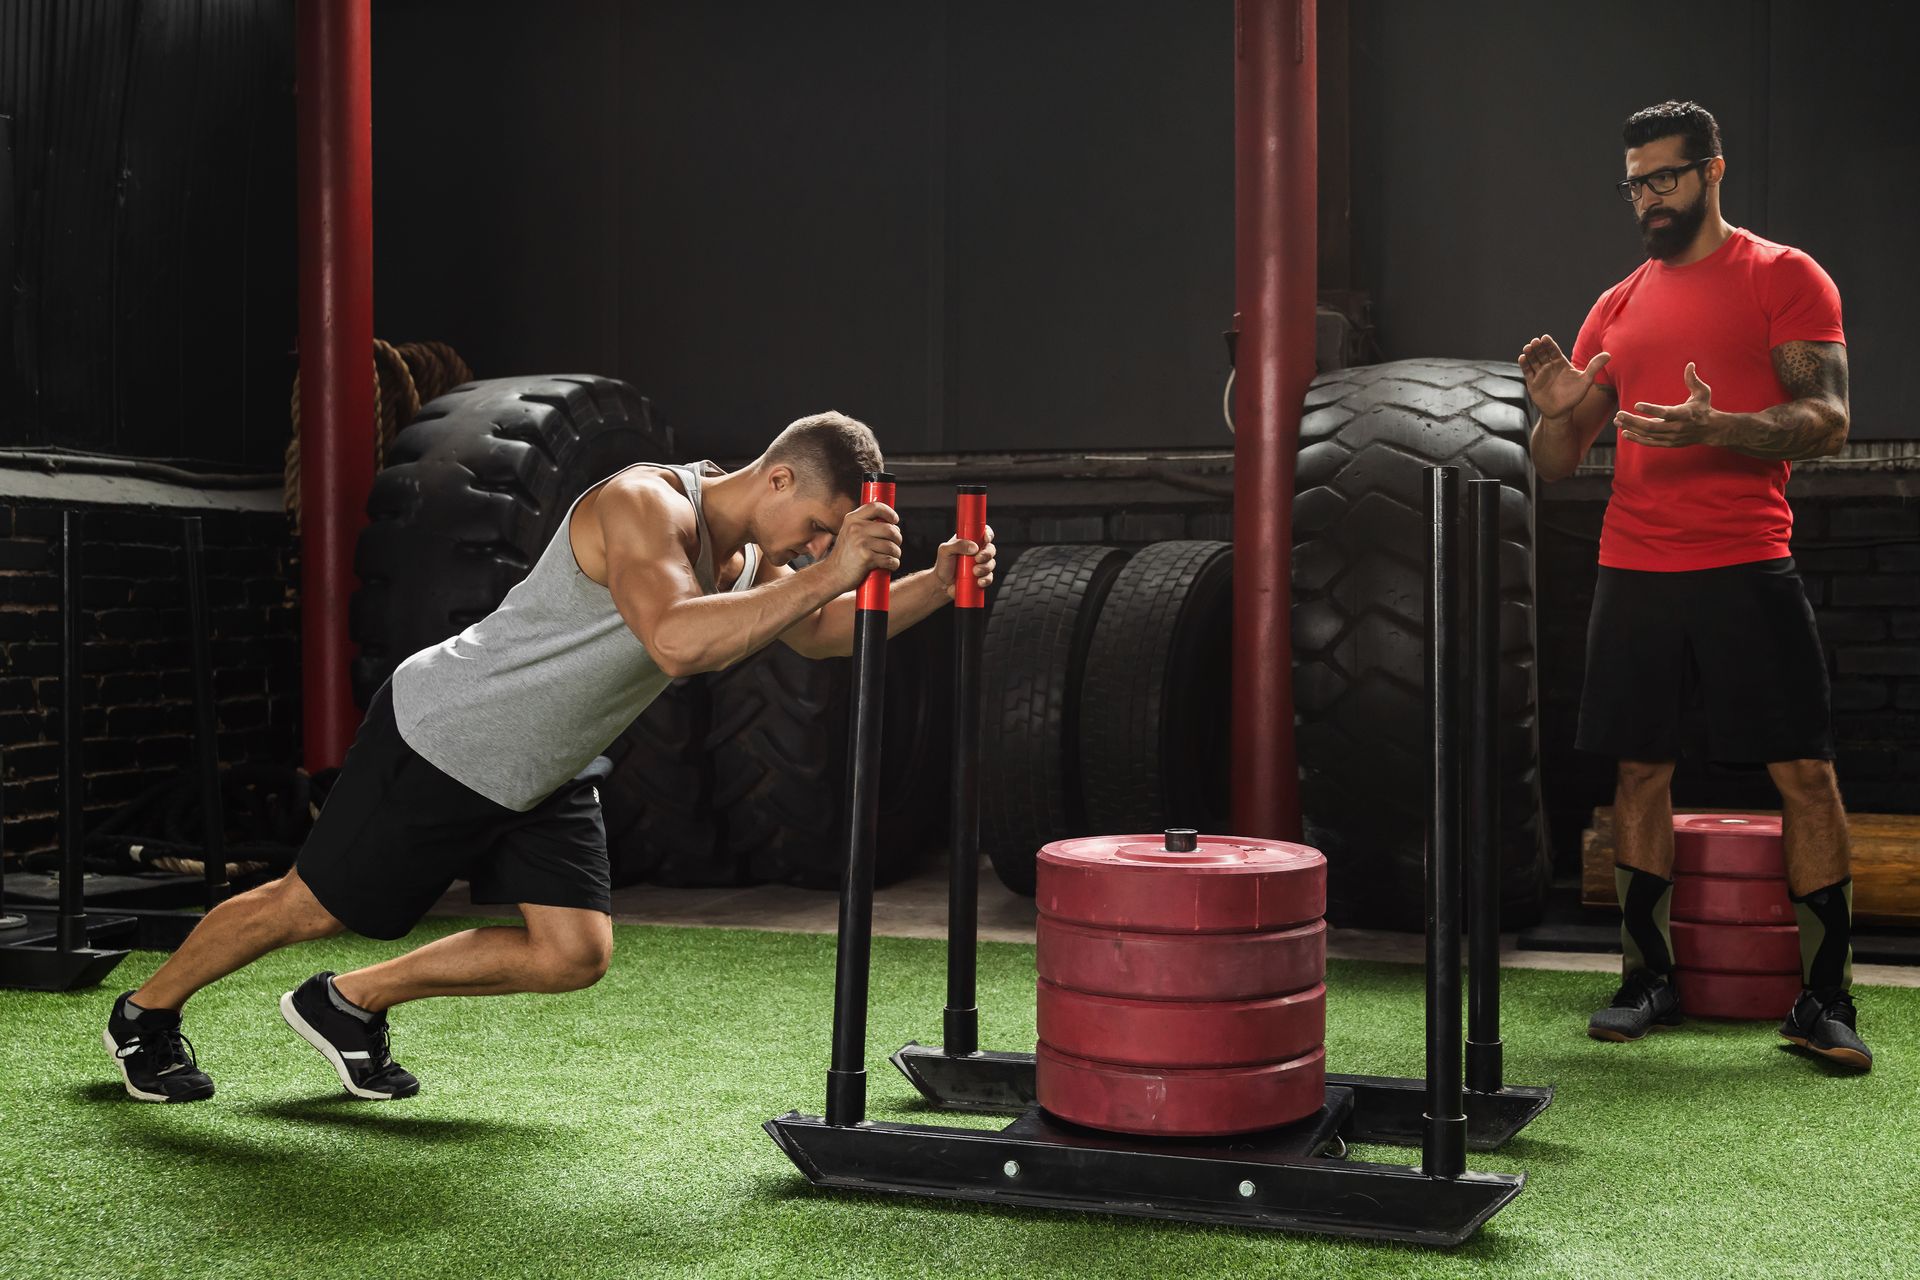 a man is pushing a sled in a gym while another man watches .